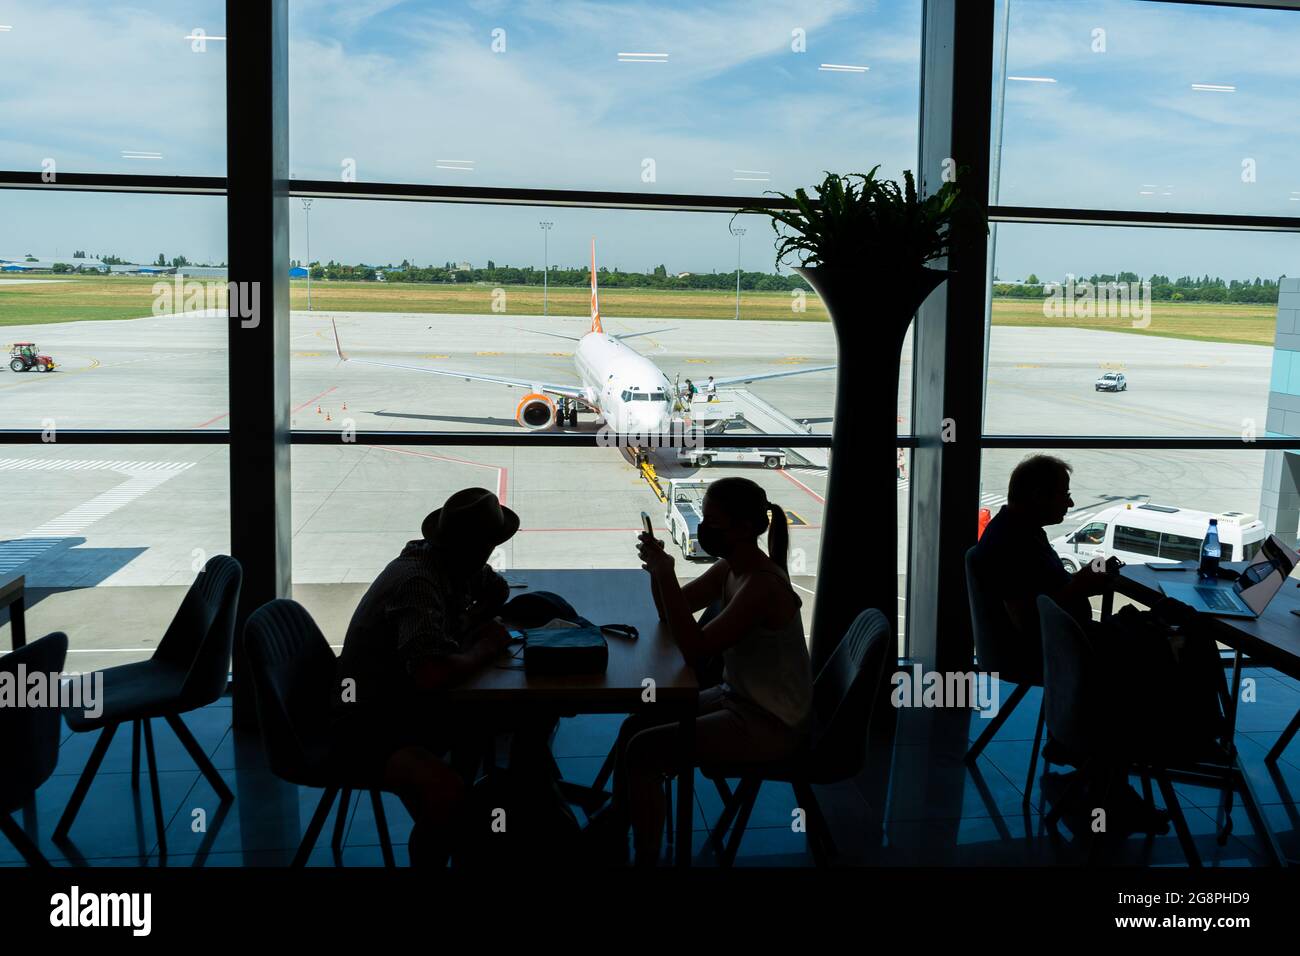 Ukraine, Odessa - July 16, 2021: Odessa airport. Inside the terminal before the flight. Odesa ODS Airport. Masked people are waiting to board the plane. Travelers at the airport in the waiting room. Stock Photo